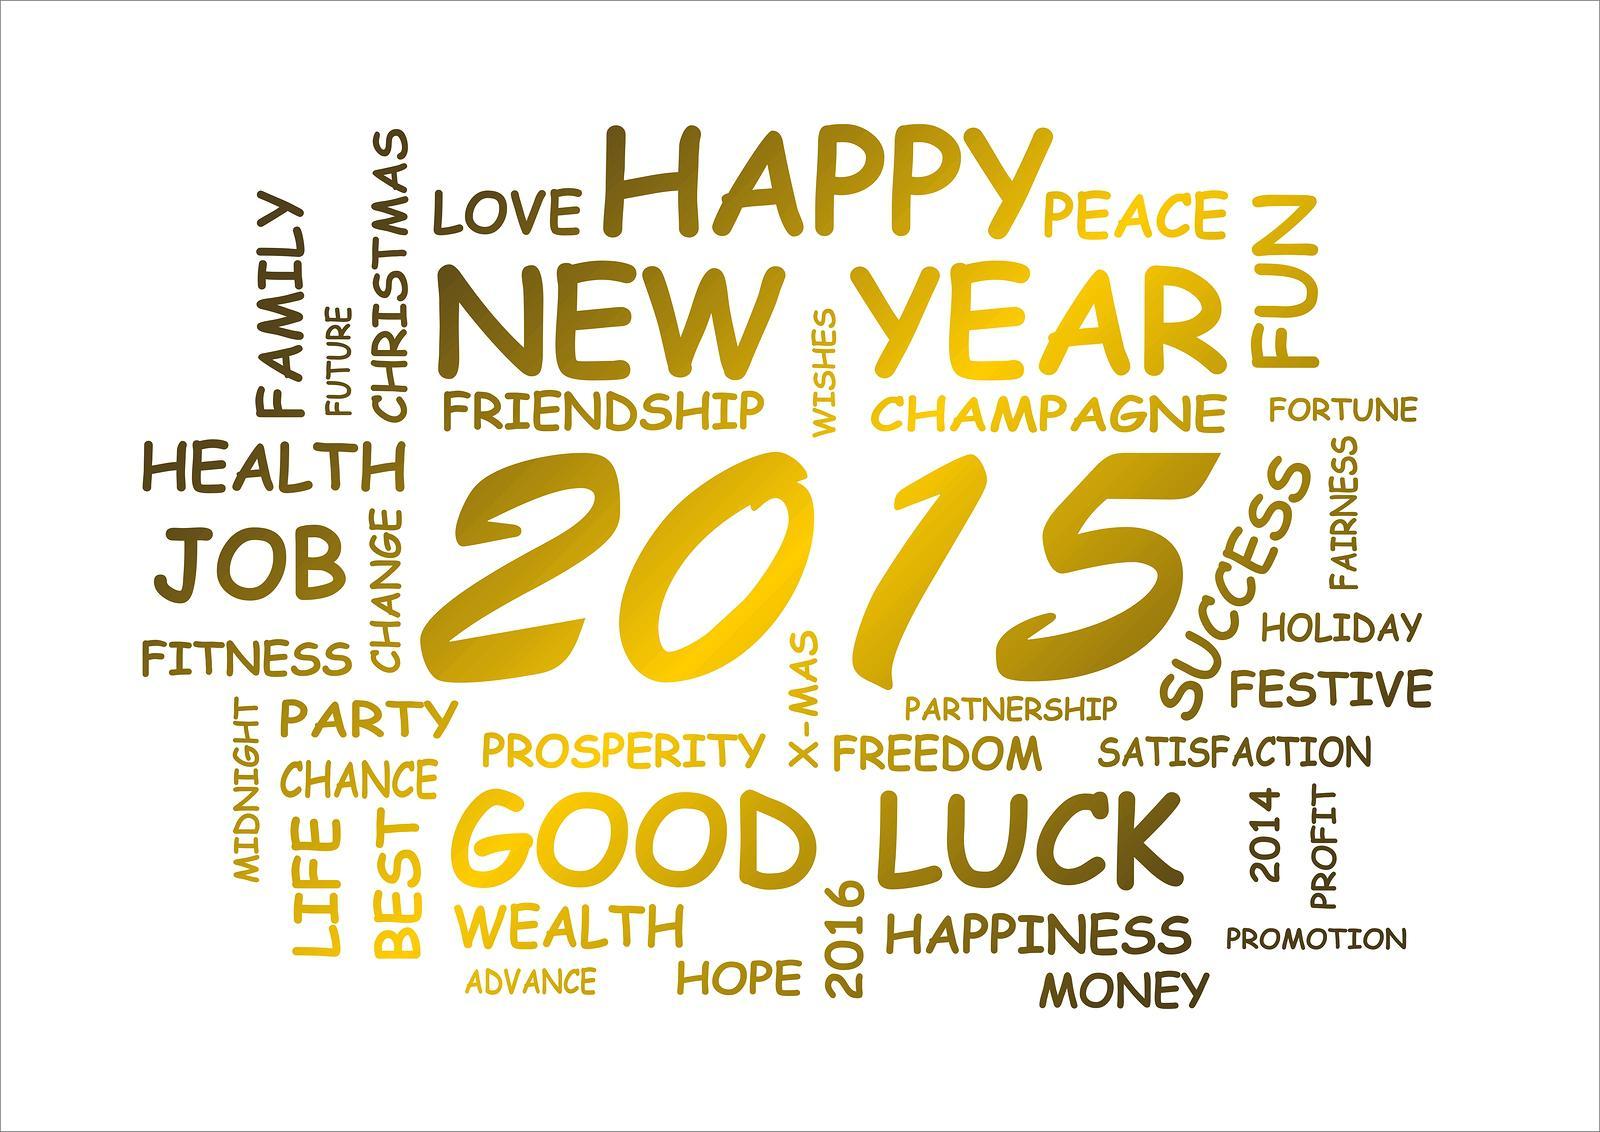 HD Wallpaper Happy New Year 2015 Image Pc Wallpaper New Year 2015